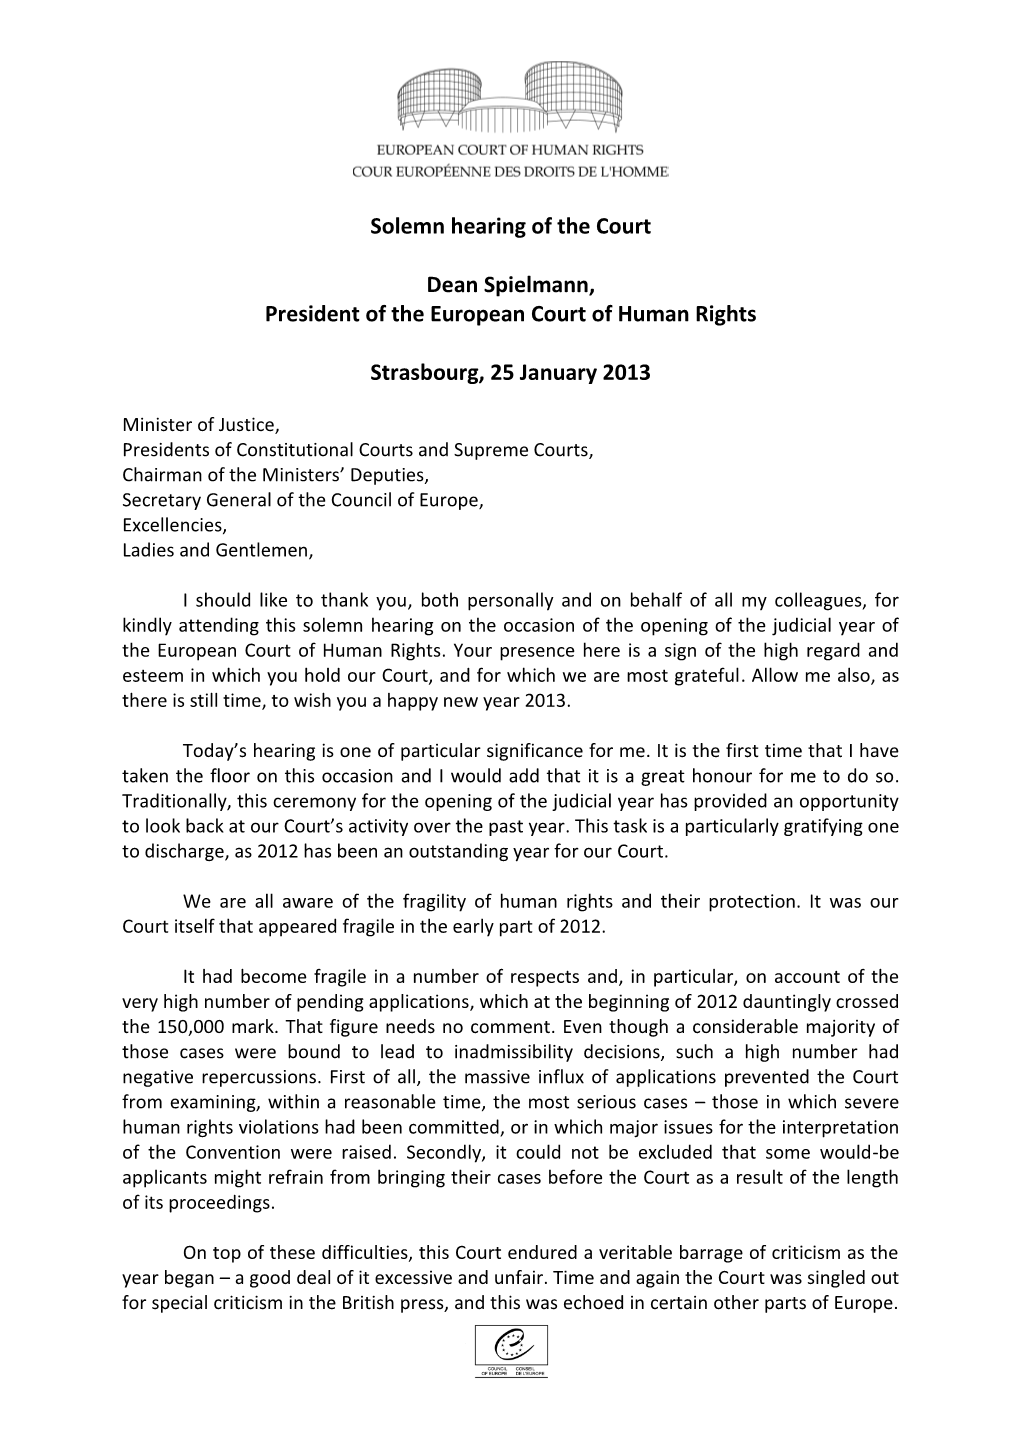 Press Conference Solemn Hearing of the Court Spielmann 25 January 2013